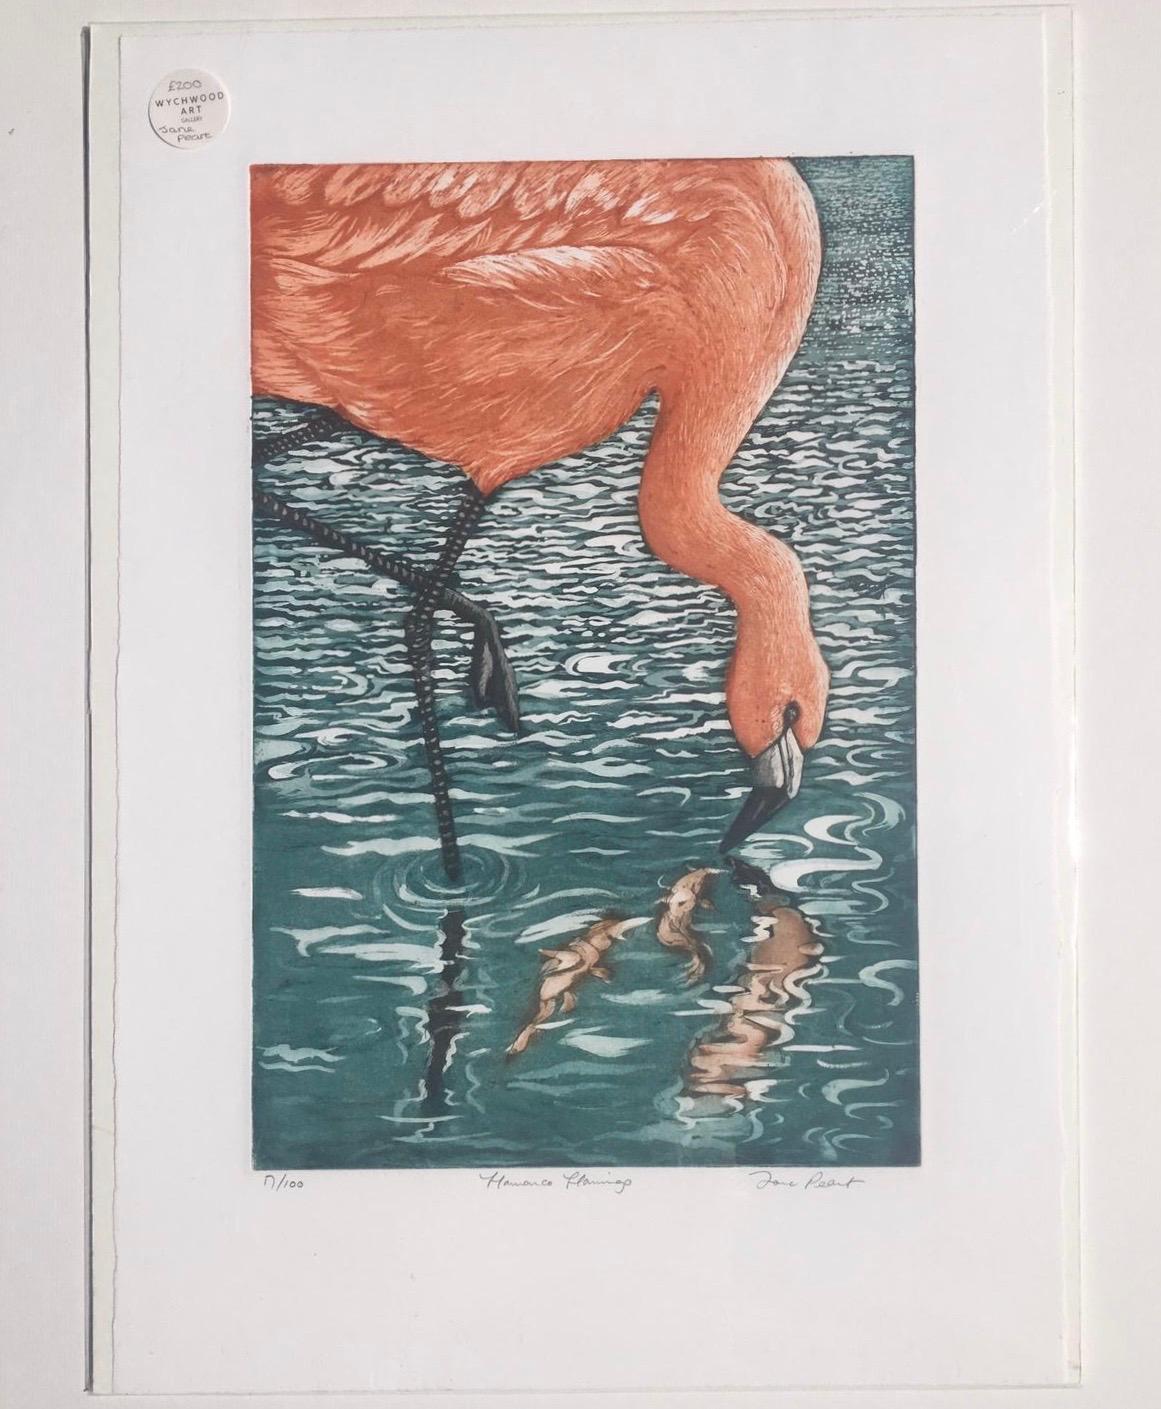 Flamenco Flamingo [2014]
limited_edition and hand signed by the artist 
Etching/aquatint
Edition number 100
Image size: H:46cm cm x W:31cm cm
Complete Size of Unframed Work: H:56cm cm x W:41cm cm x D:1mmcm
Sold Unframed
Please note that insitu